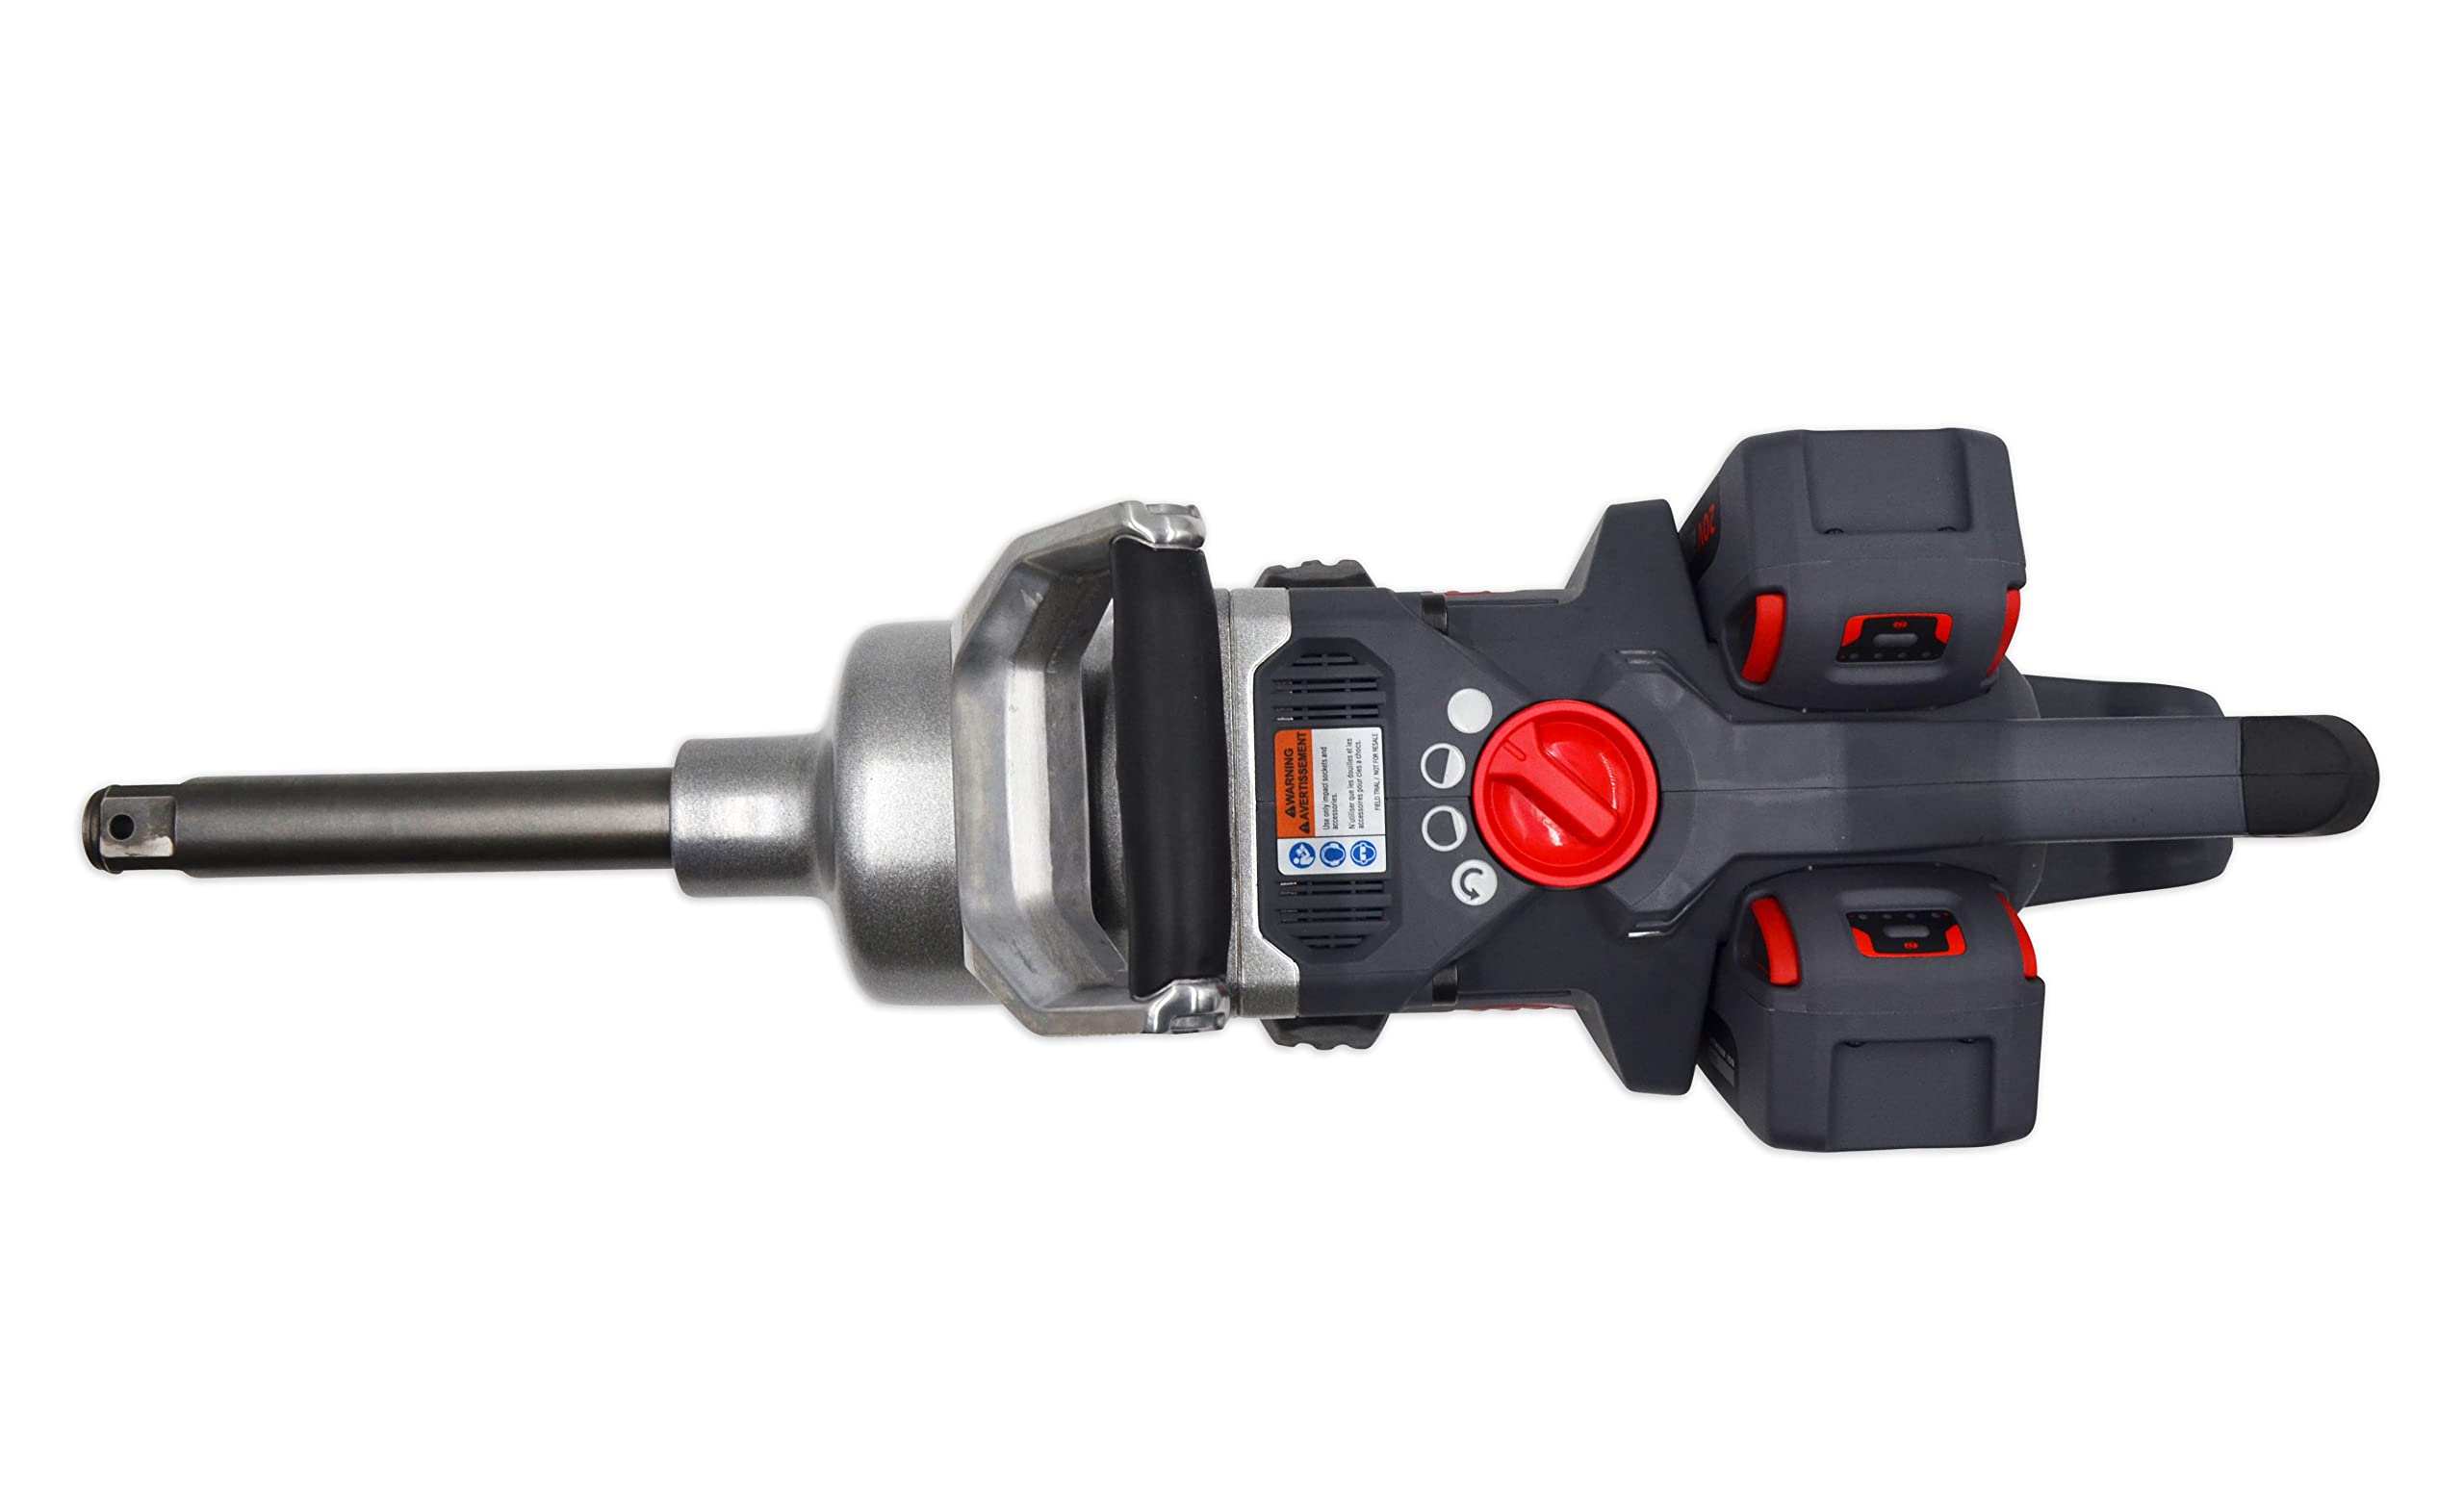 TOOL ONLY! Ingersoll Rand W9691  20 Volt Cordless High torque 1" Drive Impact Wrench 3000 ft-lbs Nut-busting Torque, 6" Extended Anvil